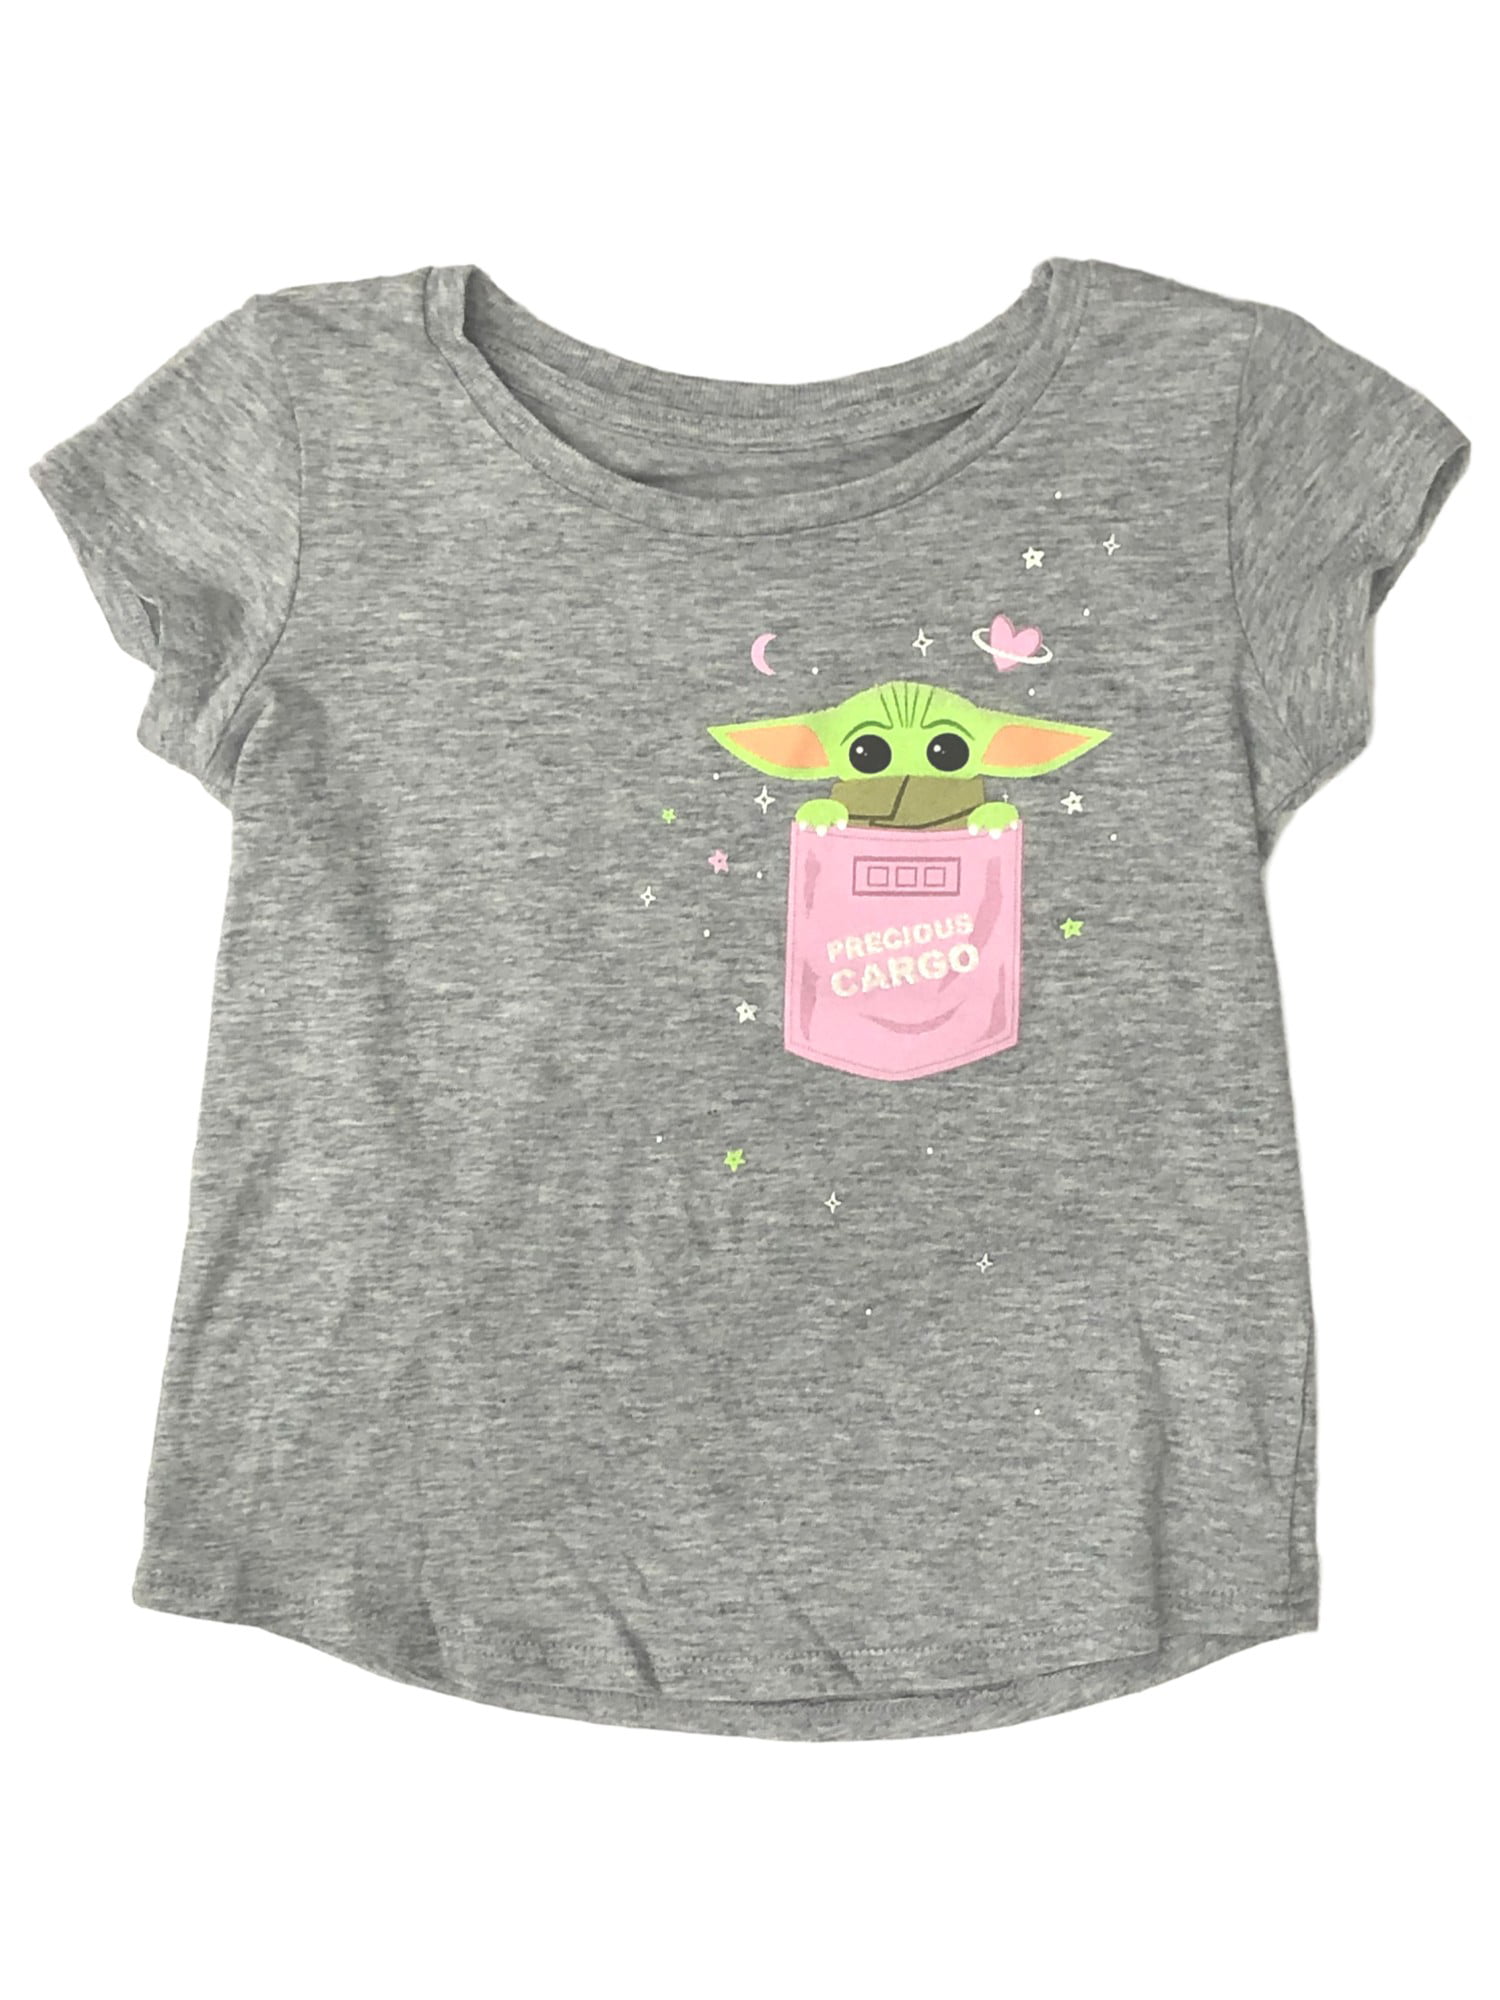 Jumping Beans Toddler Girls 2T-5T Star Wars Sketchy Droids Graphic Tee 